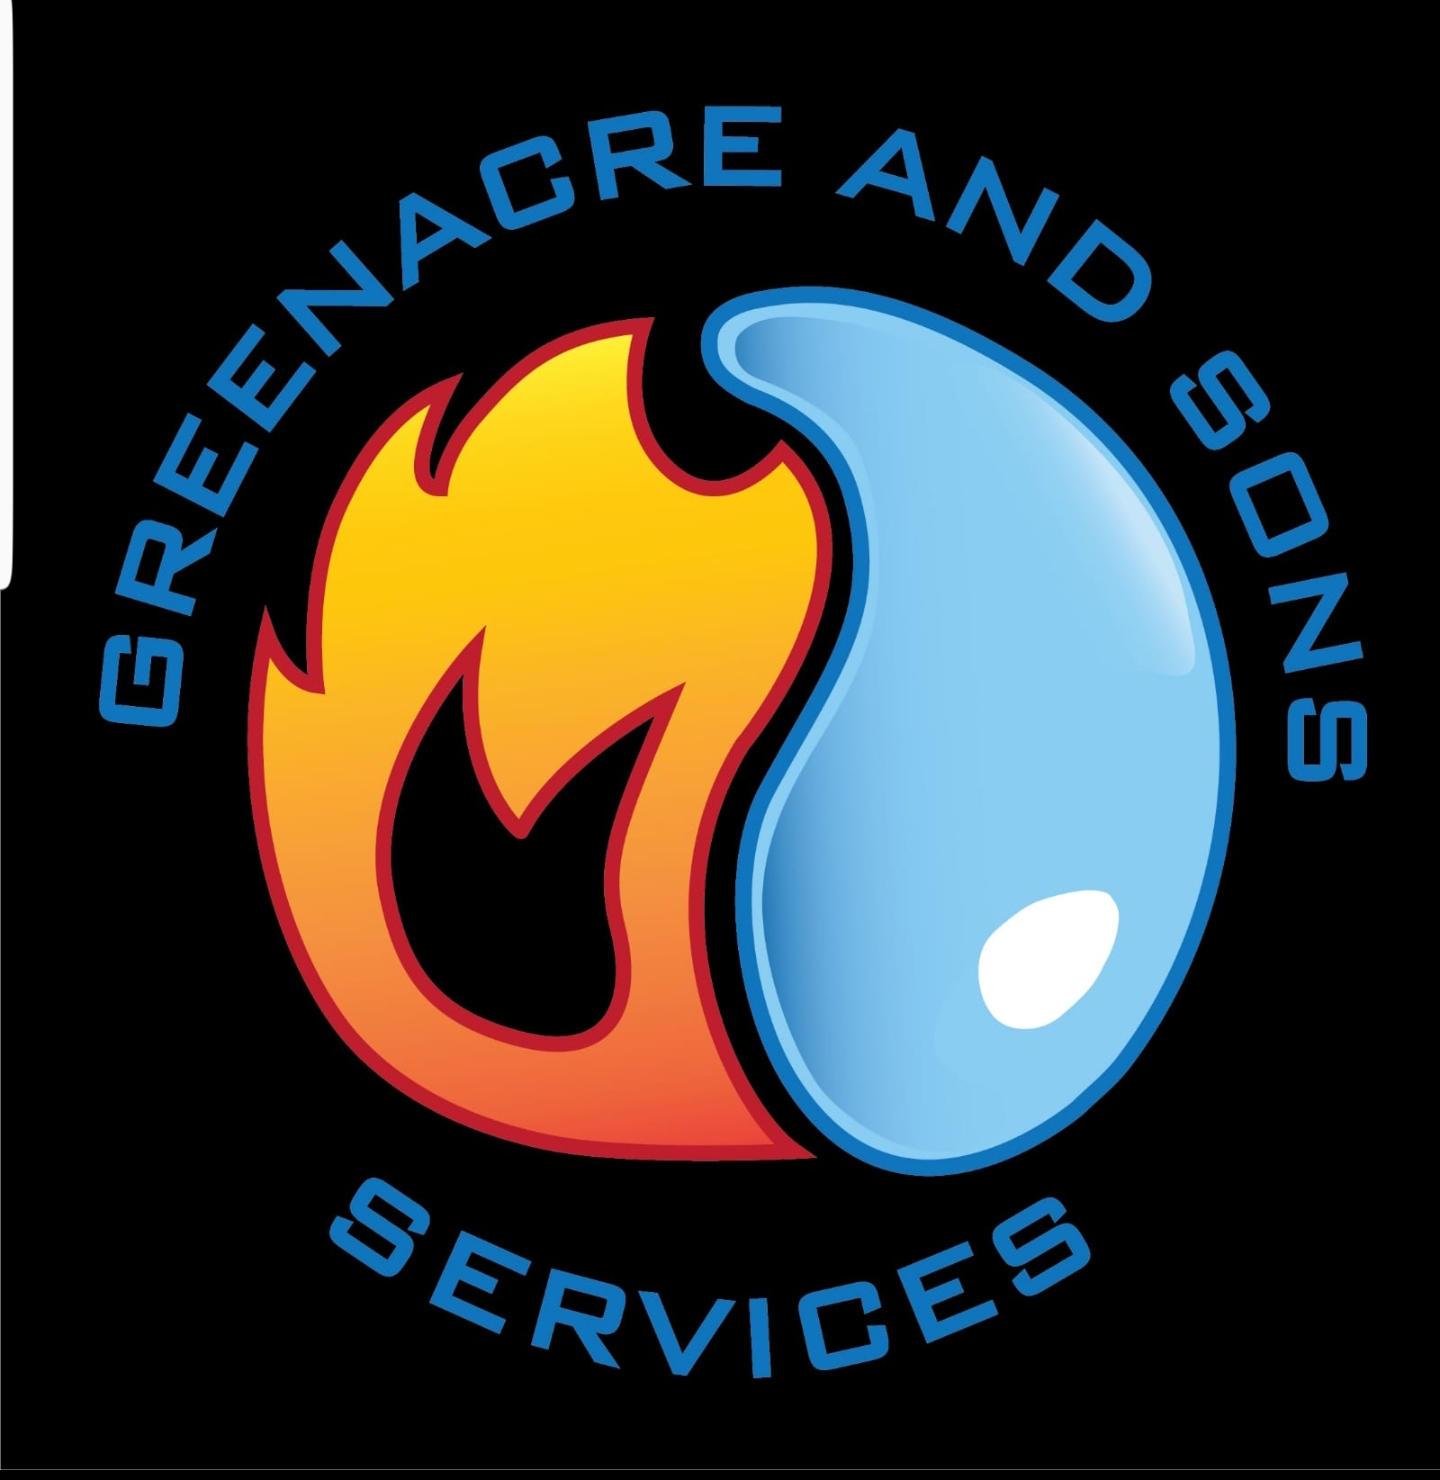 GSS - Greenacre & Sons Services